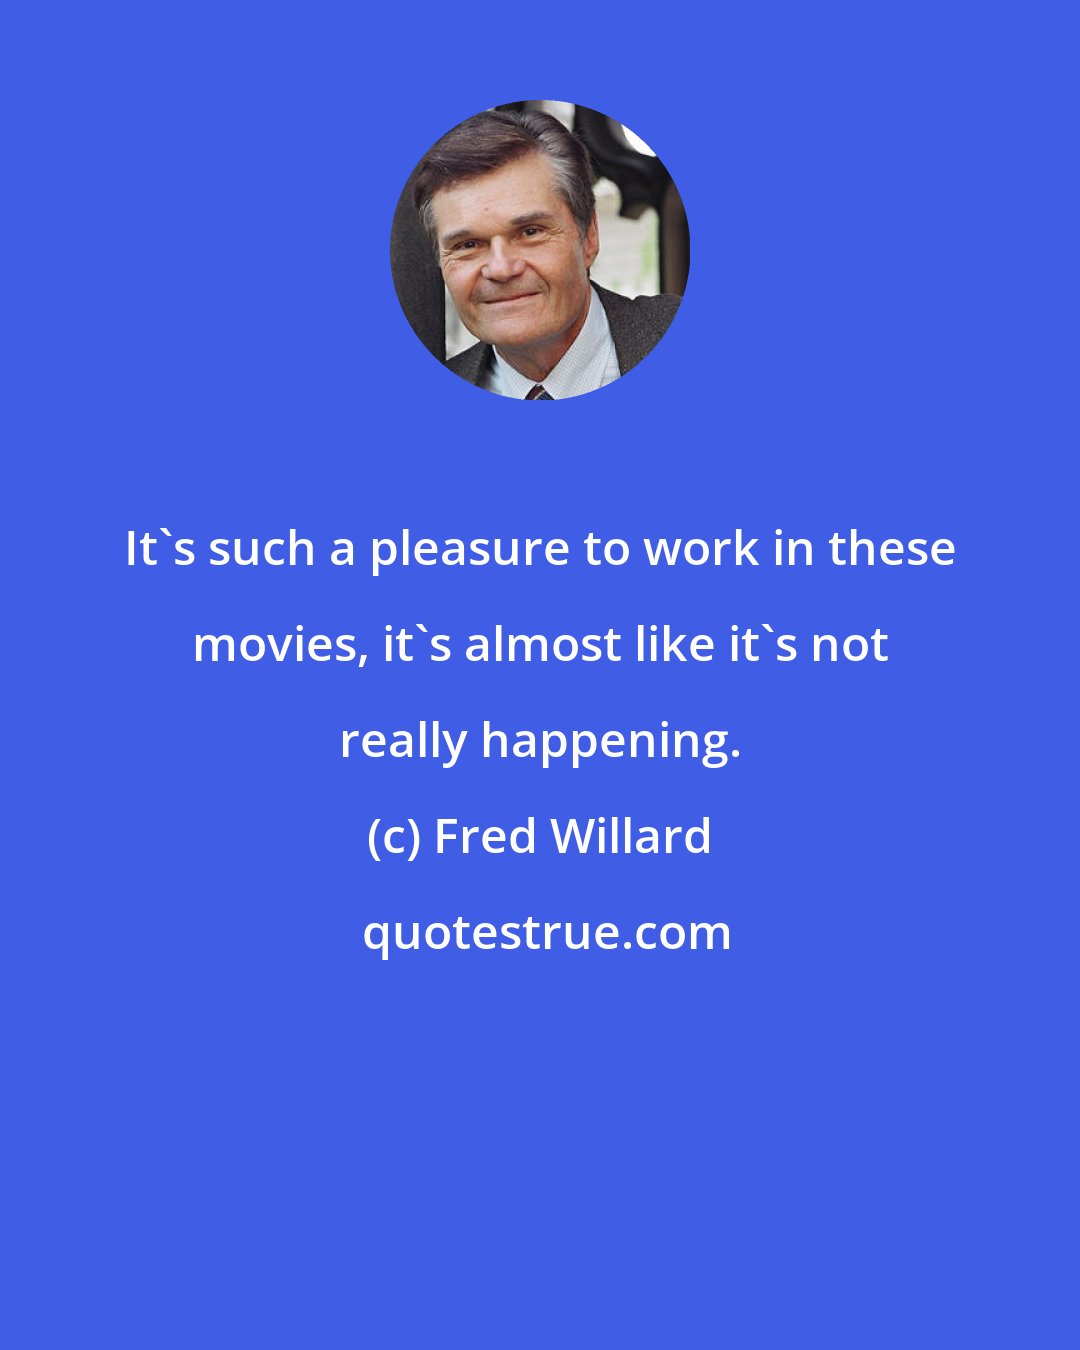 Fred Willard: It's such a pleasure to work in these movies, it's almost like it's not really happening.